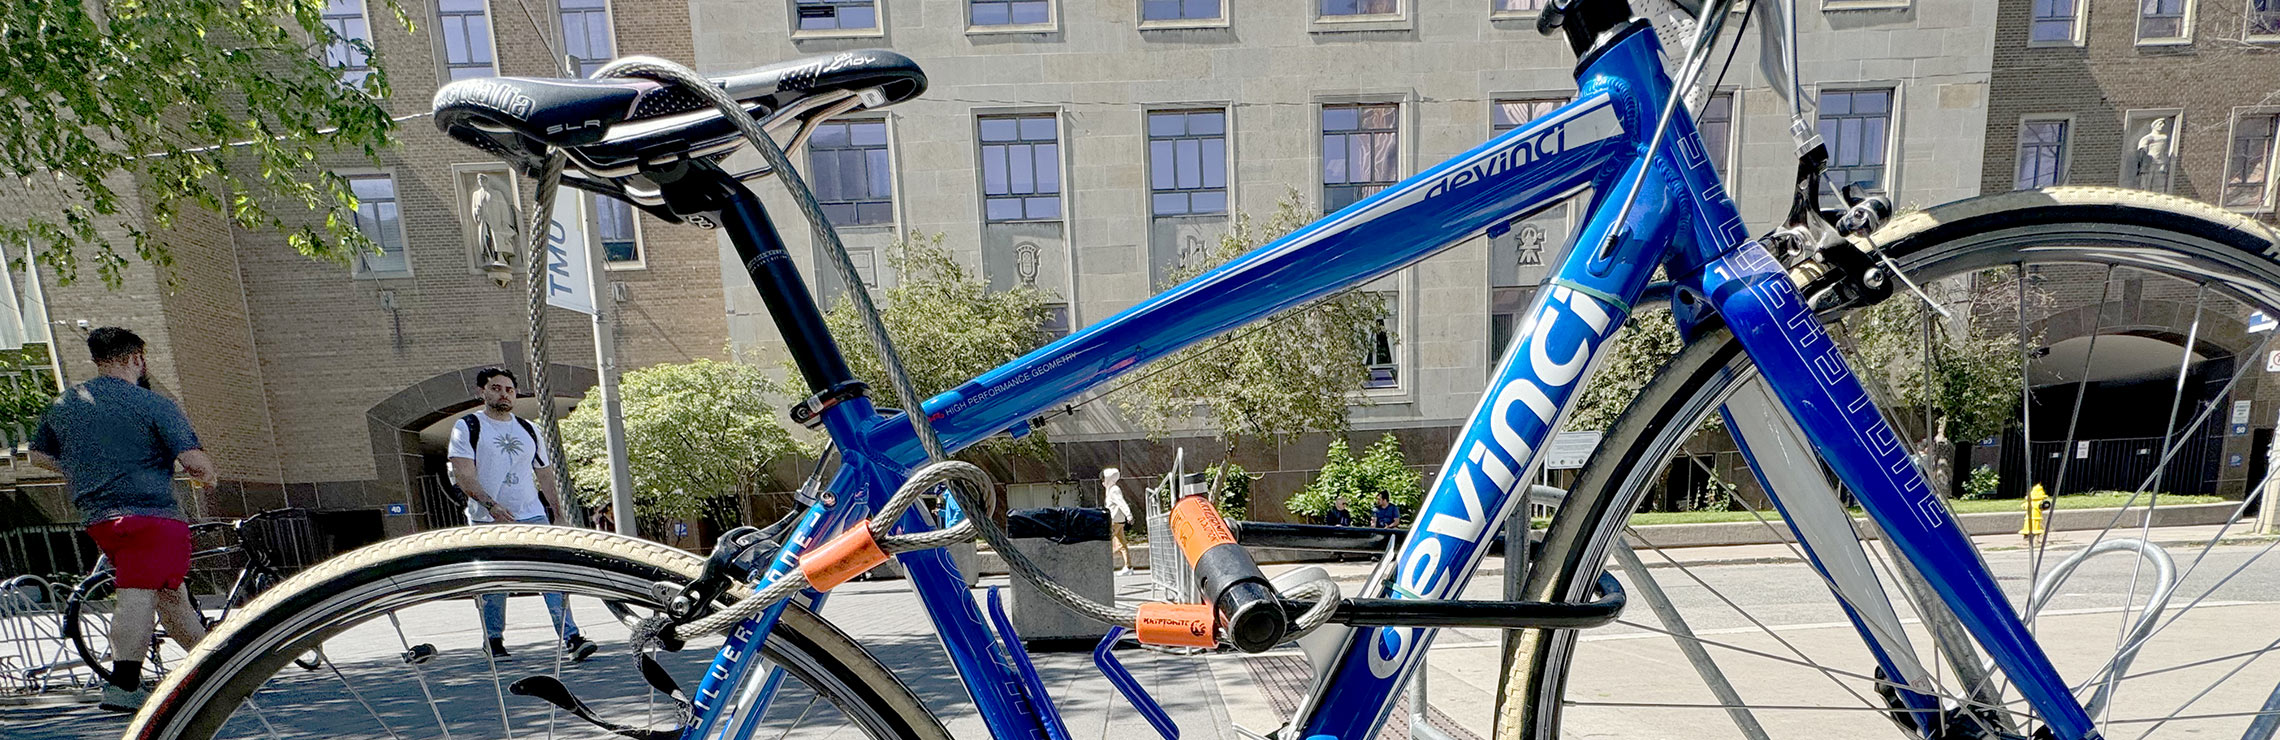 A blue, Canadian-made bicycle is locked to a bike rack on campus with Kerr Hall in the background.